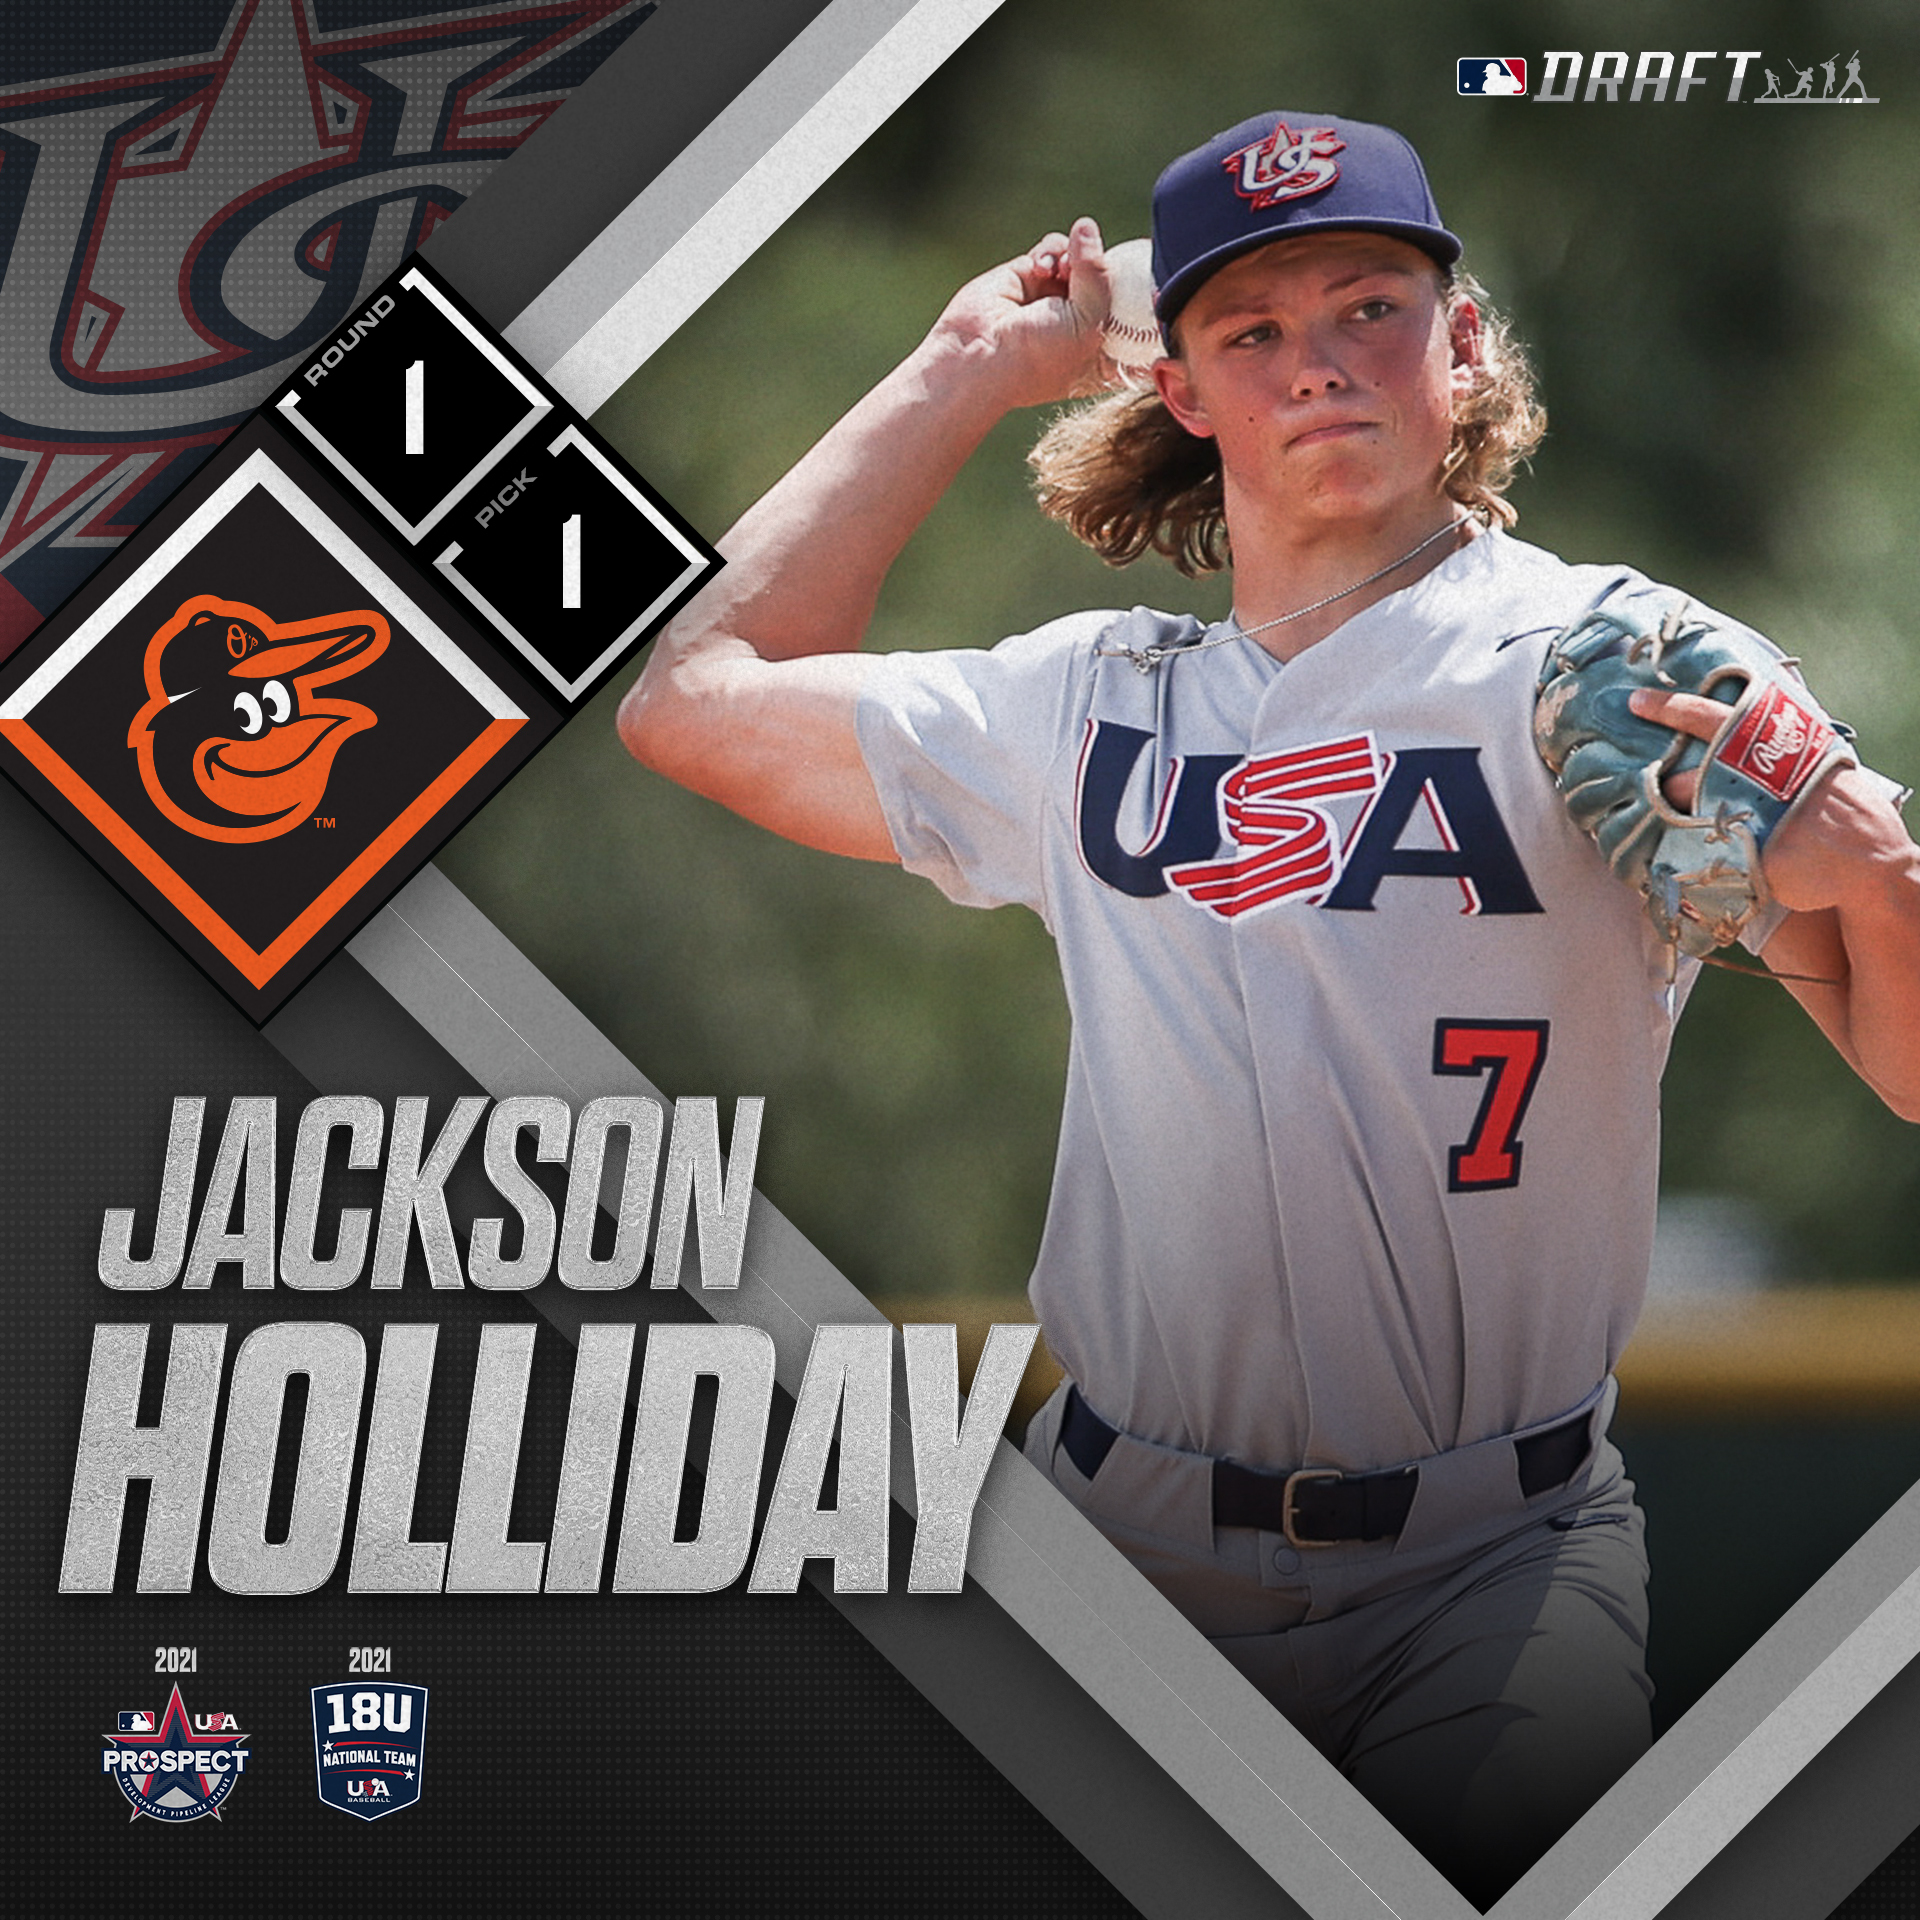 USA Baseball on X: The Holliday season started early in Baltimore